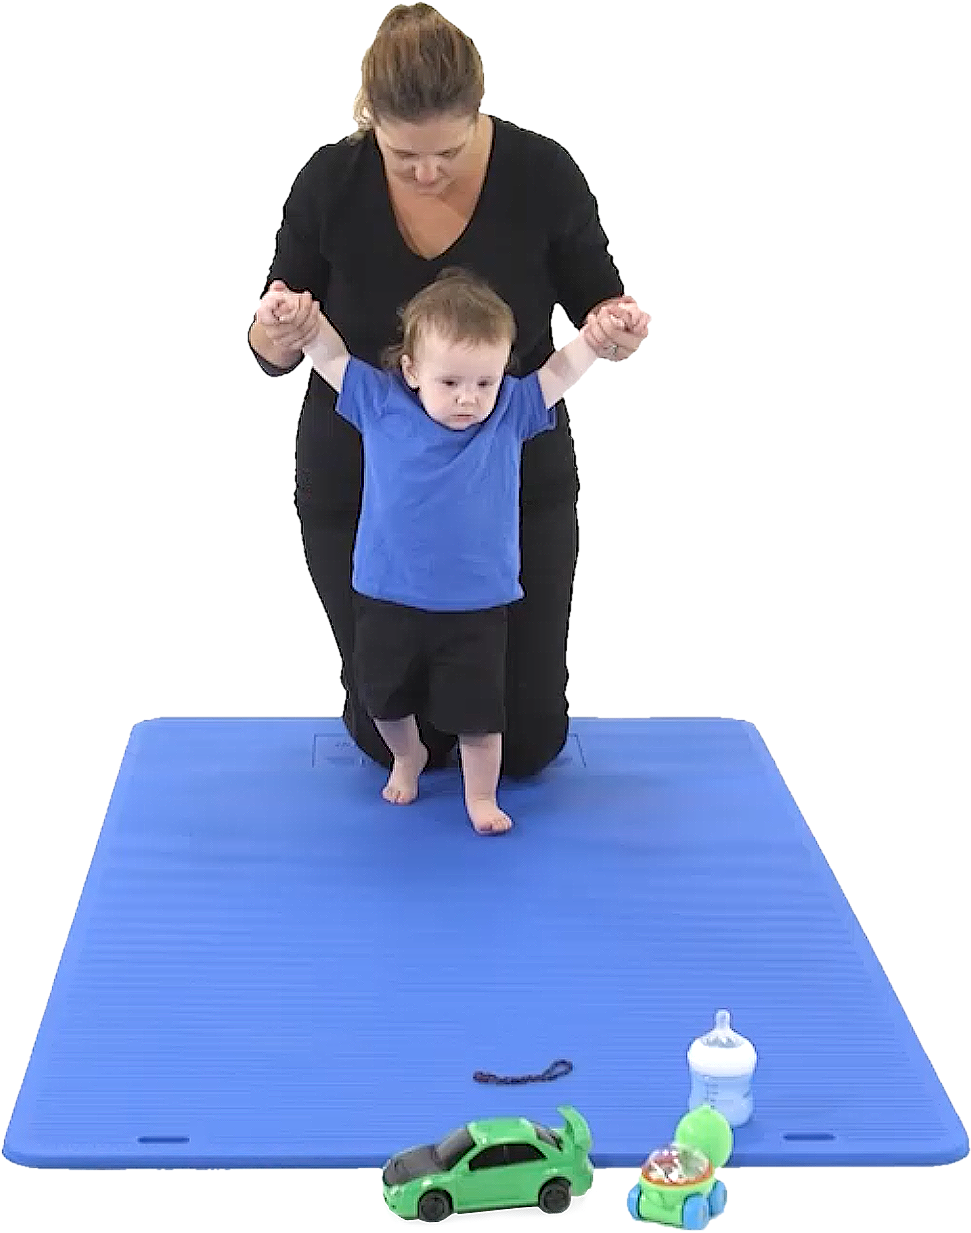 Pediatric Physical Therapy - Exercise Mat (1107x1371)